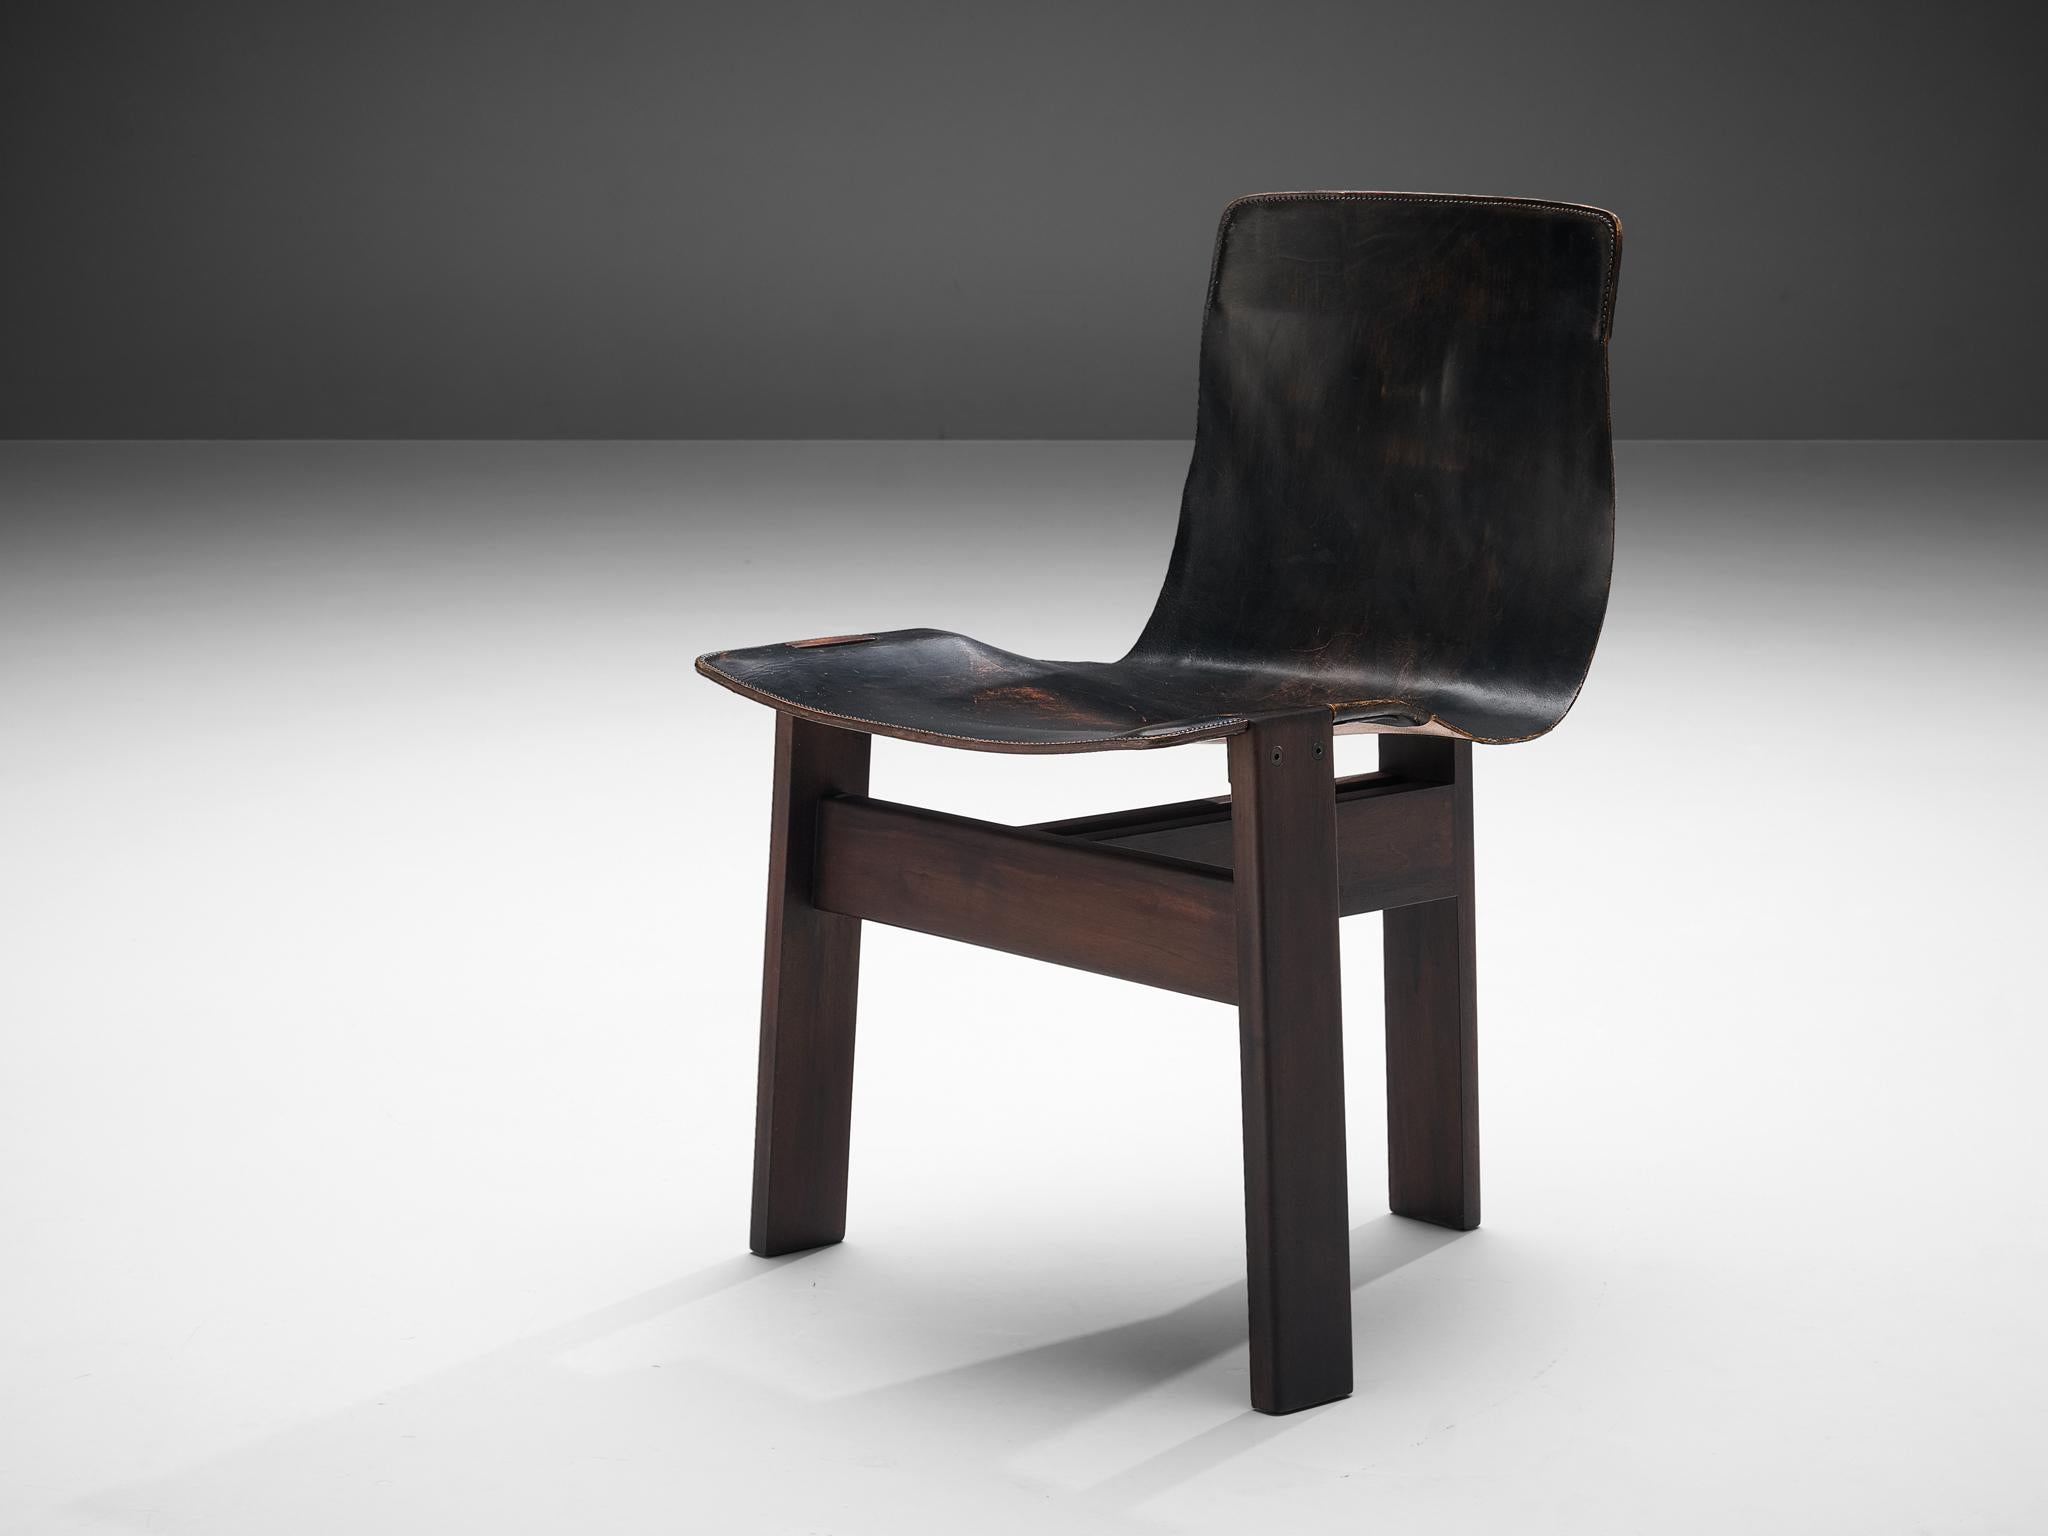 Angelo Mangiarotti for Skipper, 'Tre 3' chair, leather, wood, Italy, 1978

This tripod chair was designed in 1978 by Angelo Mangiarotti. Three interconnected flat legs, one is rising high to create a backrest, hold the seat and the backrest that are